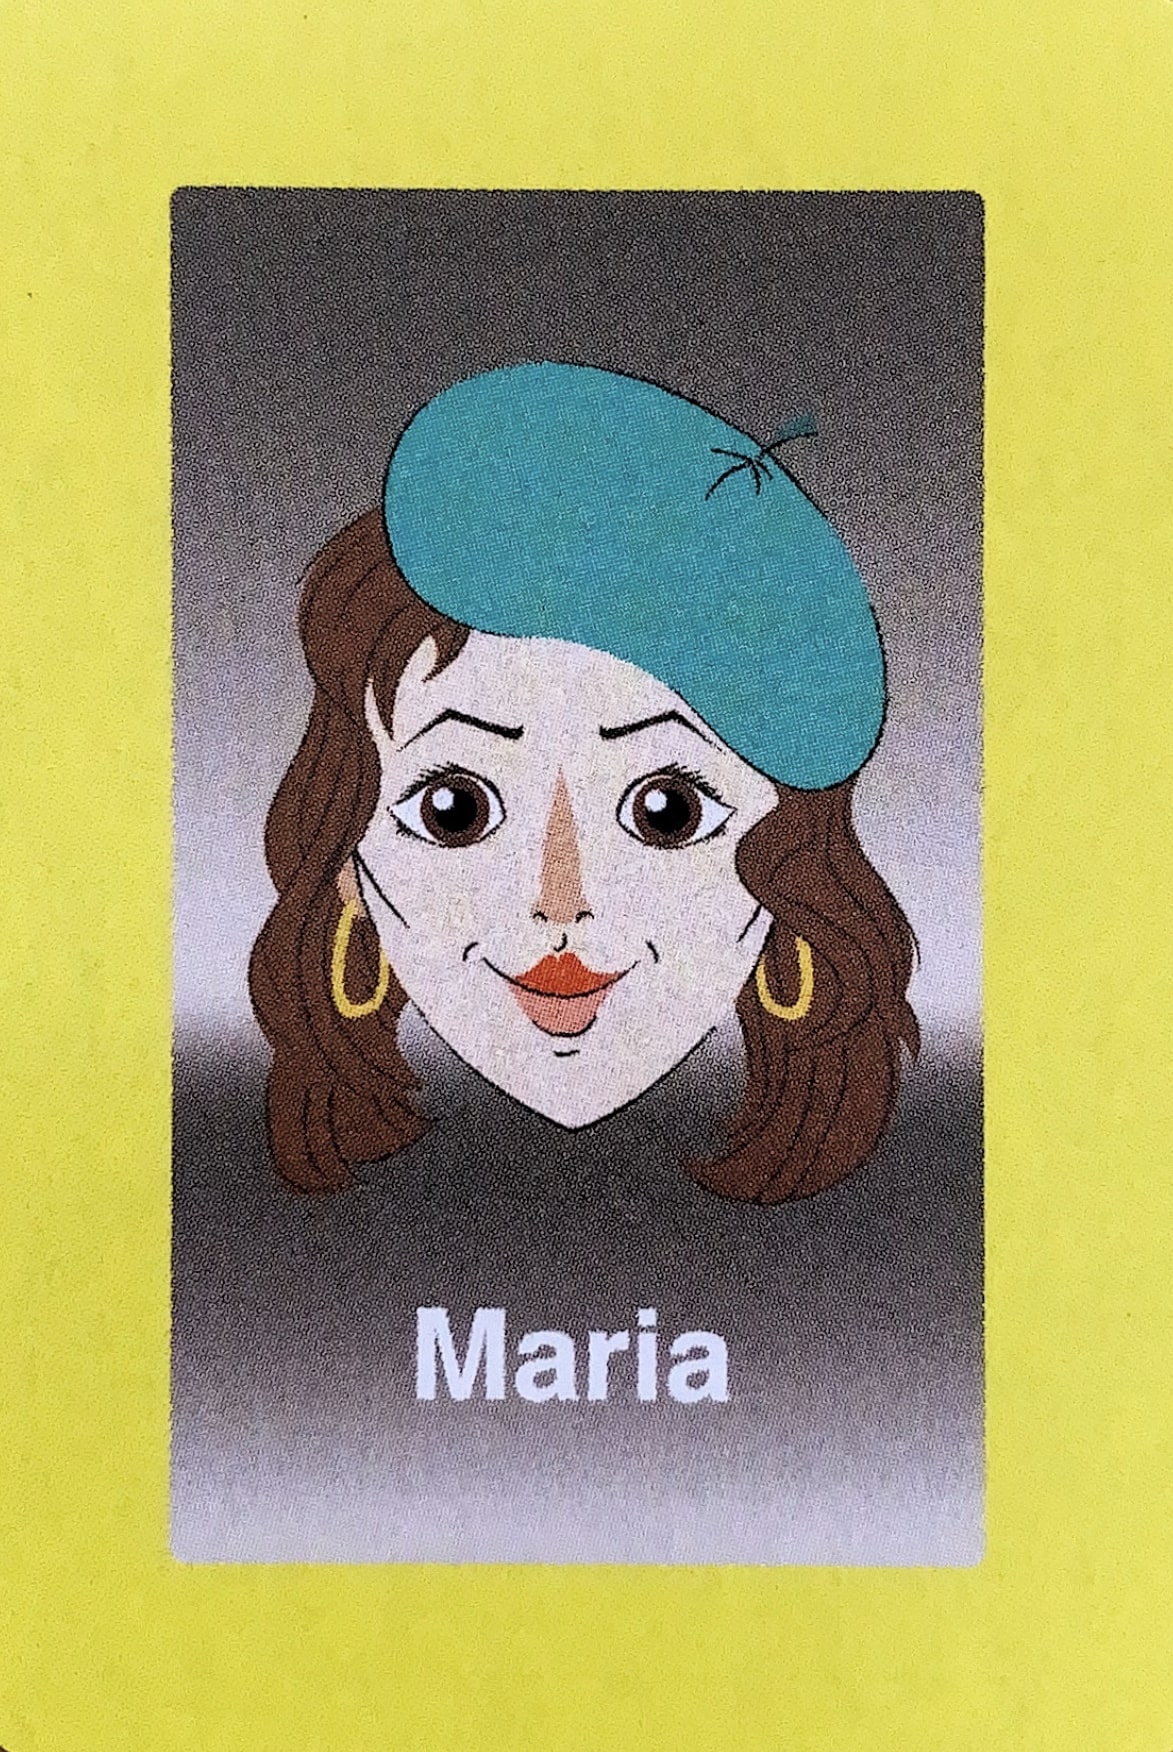  - As a beautiful Bohemian woman from Paris, Maria was an easy choice for the Guess Who?® marketing team. The problems began after her picture was taken and sent all over the world. When she saw her game-face-card, she hated it, feeling she didn’t look her best. Things only spiraled from there; she believed if she could somehow improve her looks, the public would recognize that the Guess Who?® picture was not representative of her at her most gorgeous. More than 30 surgeries later, Maria now looks like a mannequin left out in the sun too long. She still dons her distinctive green beret, hoping each morning when she looks in the mirror, it will be the stunning face she always imagined meeting her sorrowful gaze.